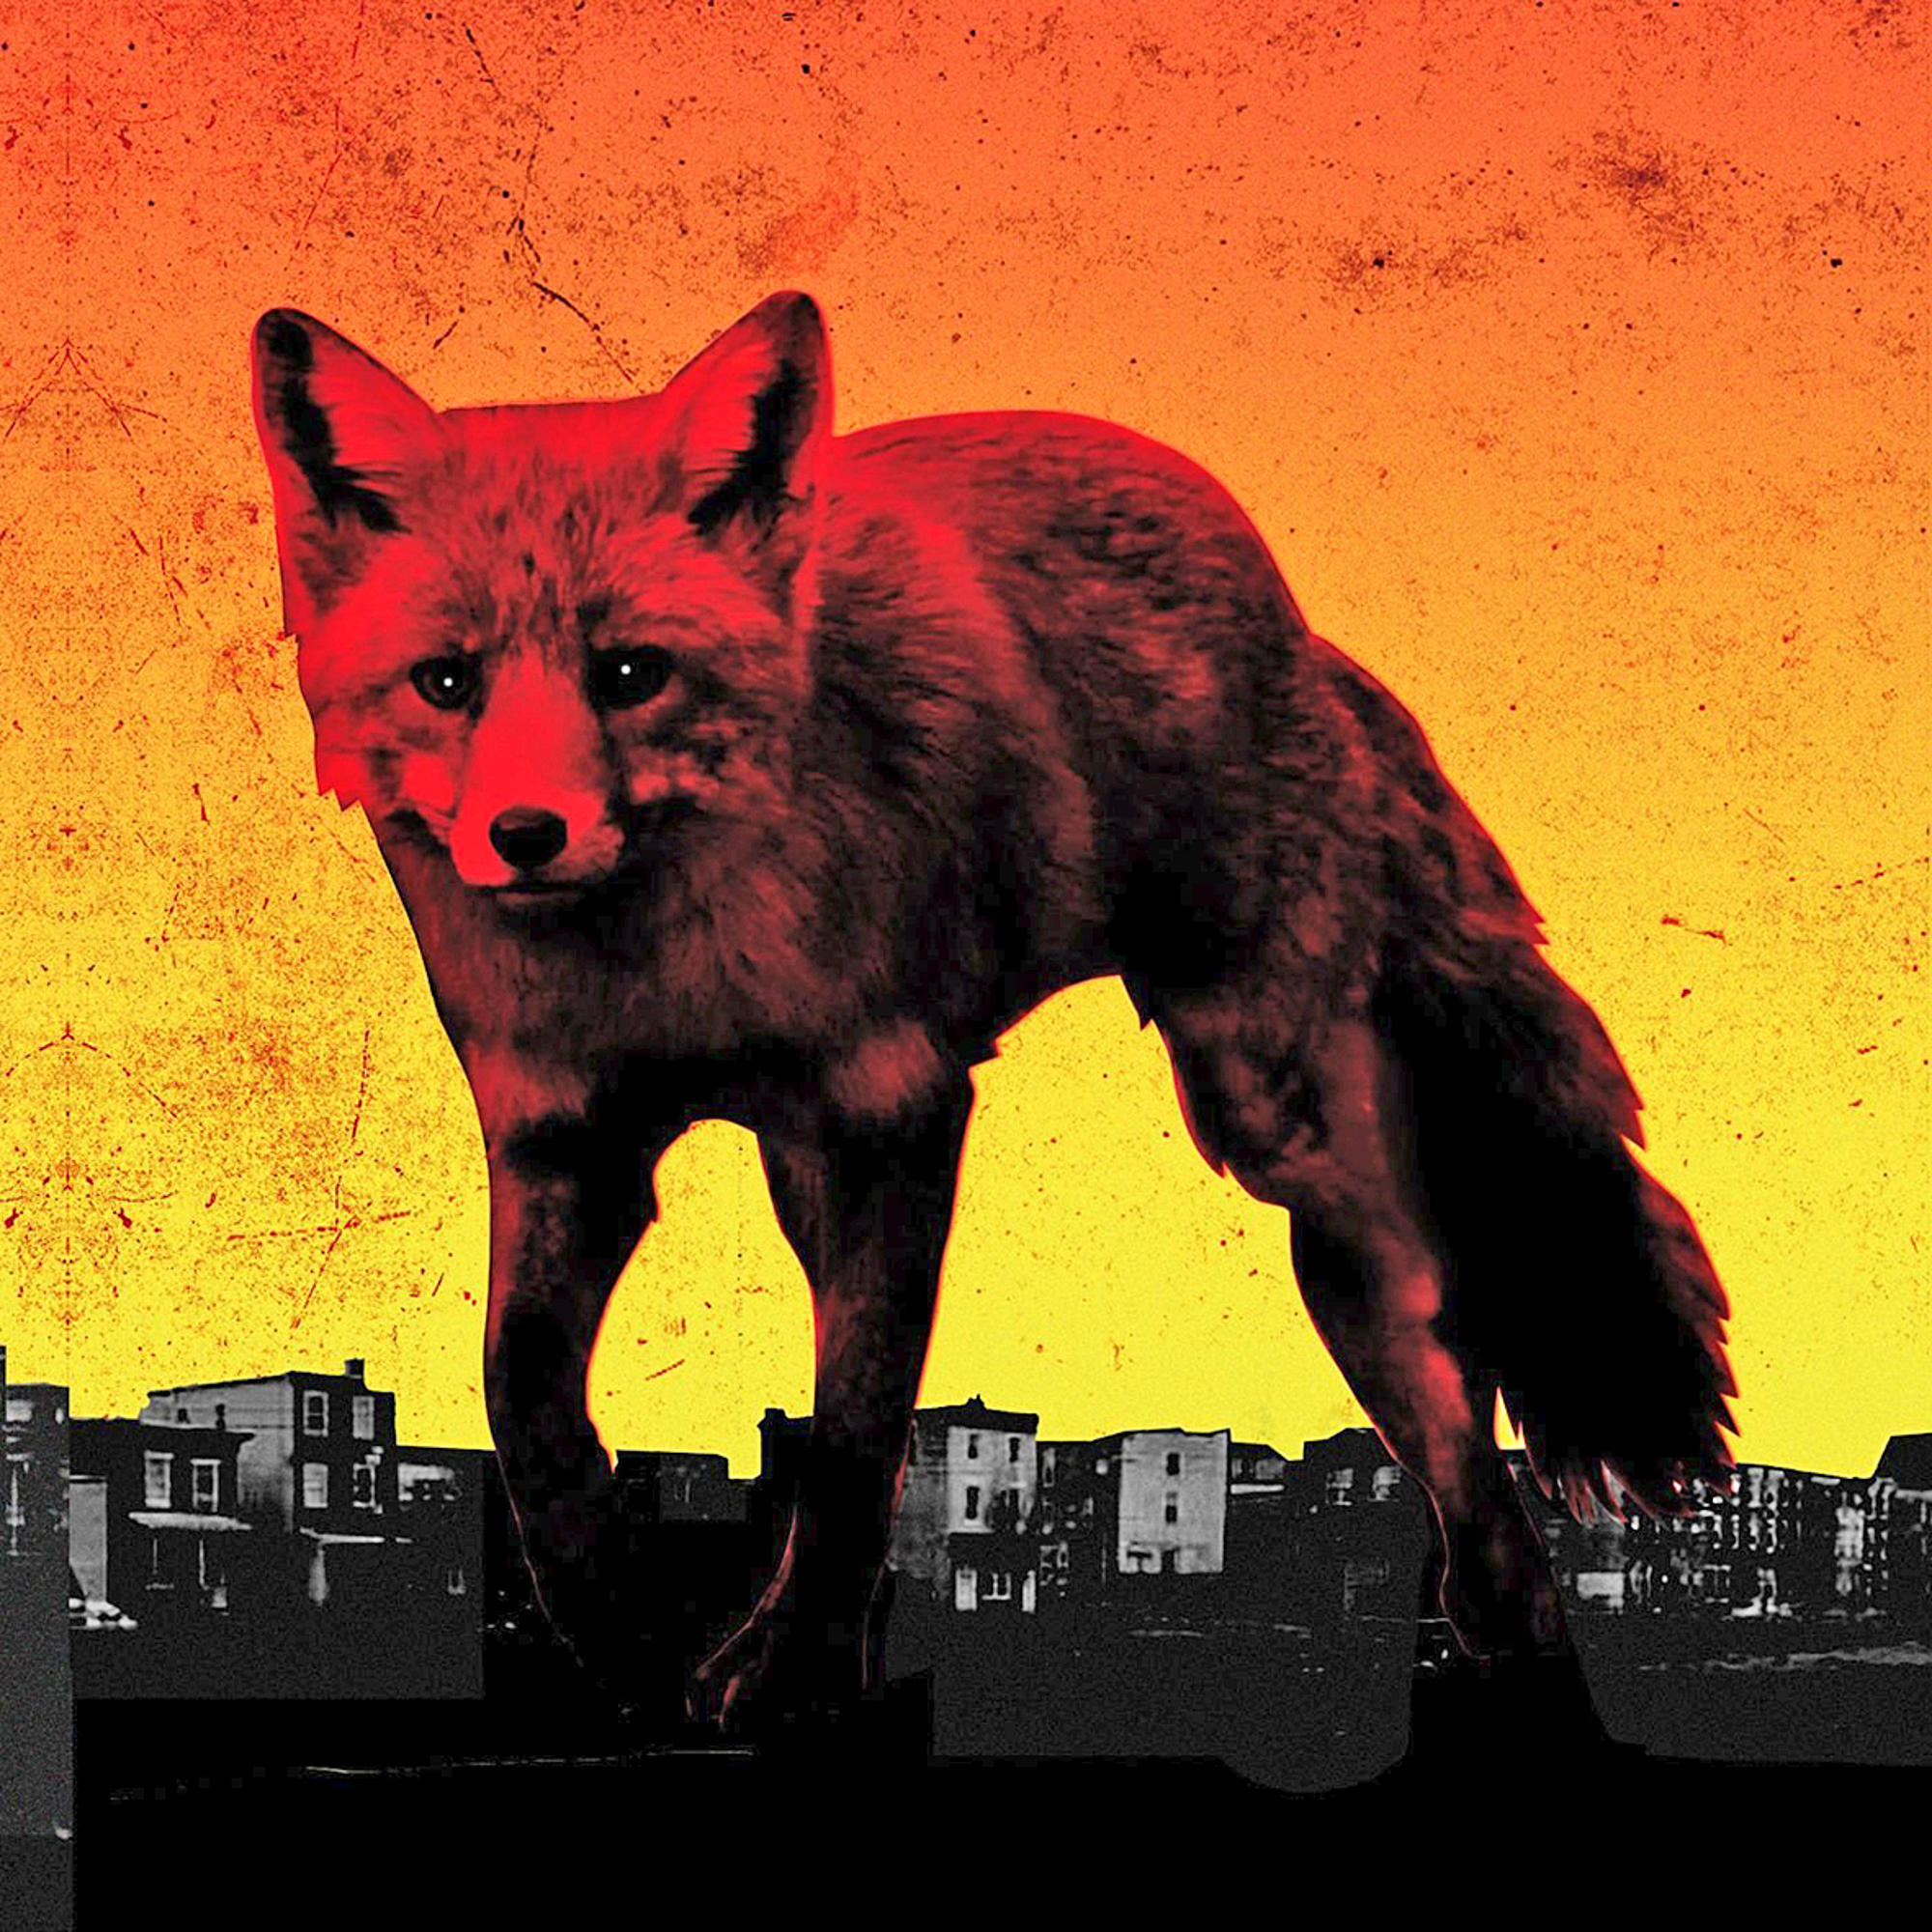 The Prodigy - The Day (CD) Is Enemy - My